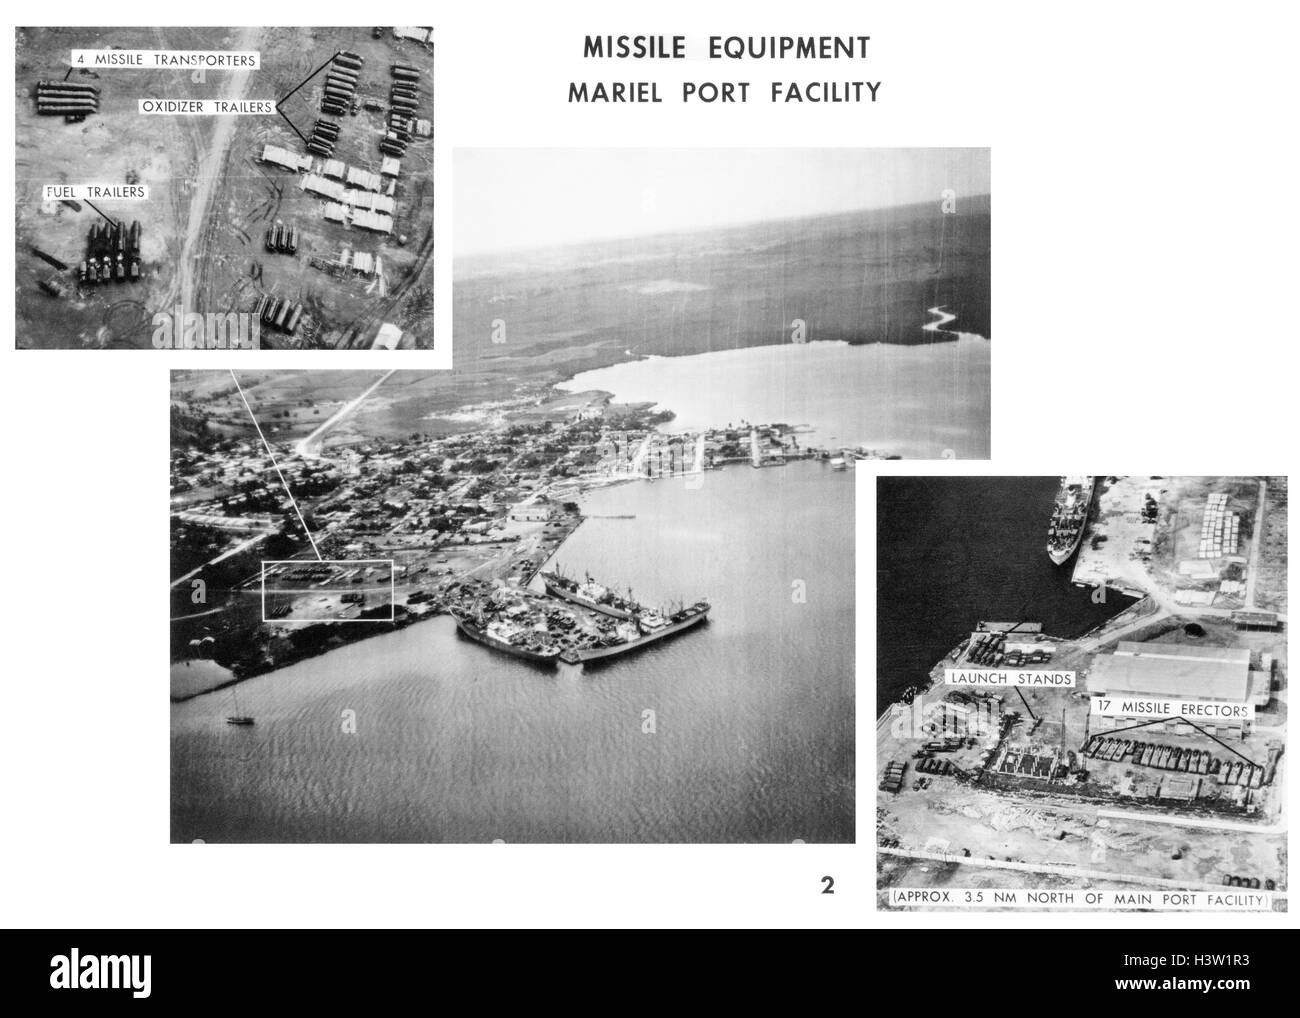 1960s NOVEMBER 4 1962 AERIAL VIEWS REVEAL VARIOUS MISSILE RELATED SITES & 3 SOVIET FREIGHTERS MARIEL NAVAL PORT CUBA Stock Photo